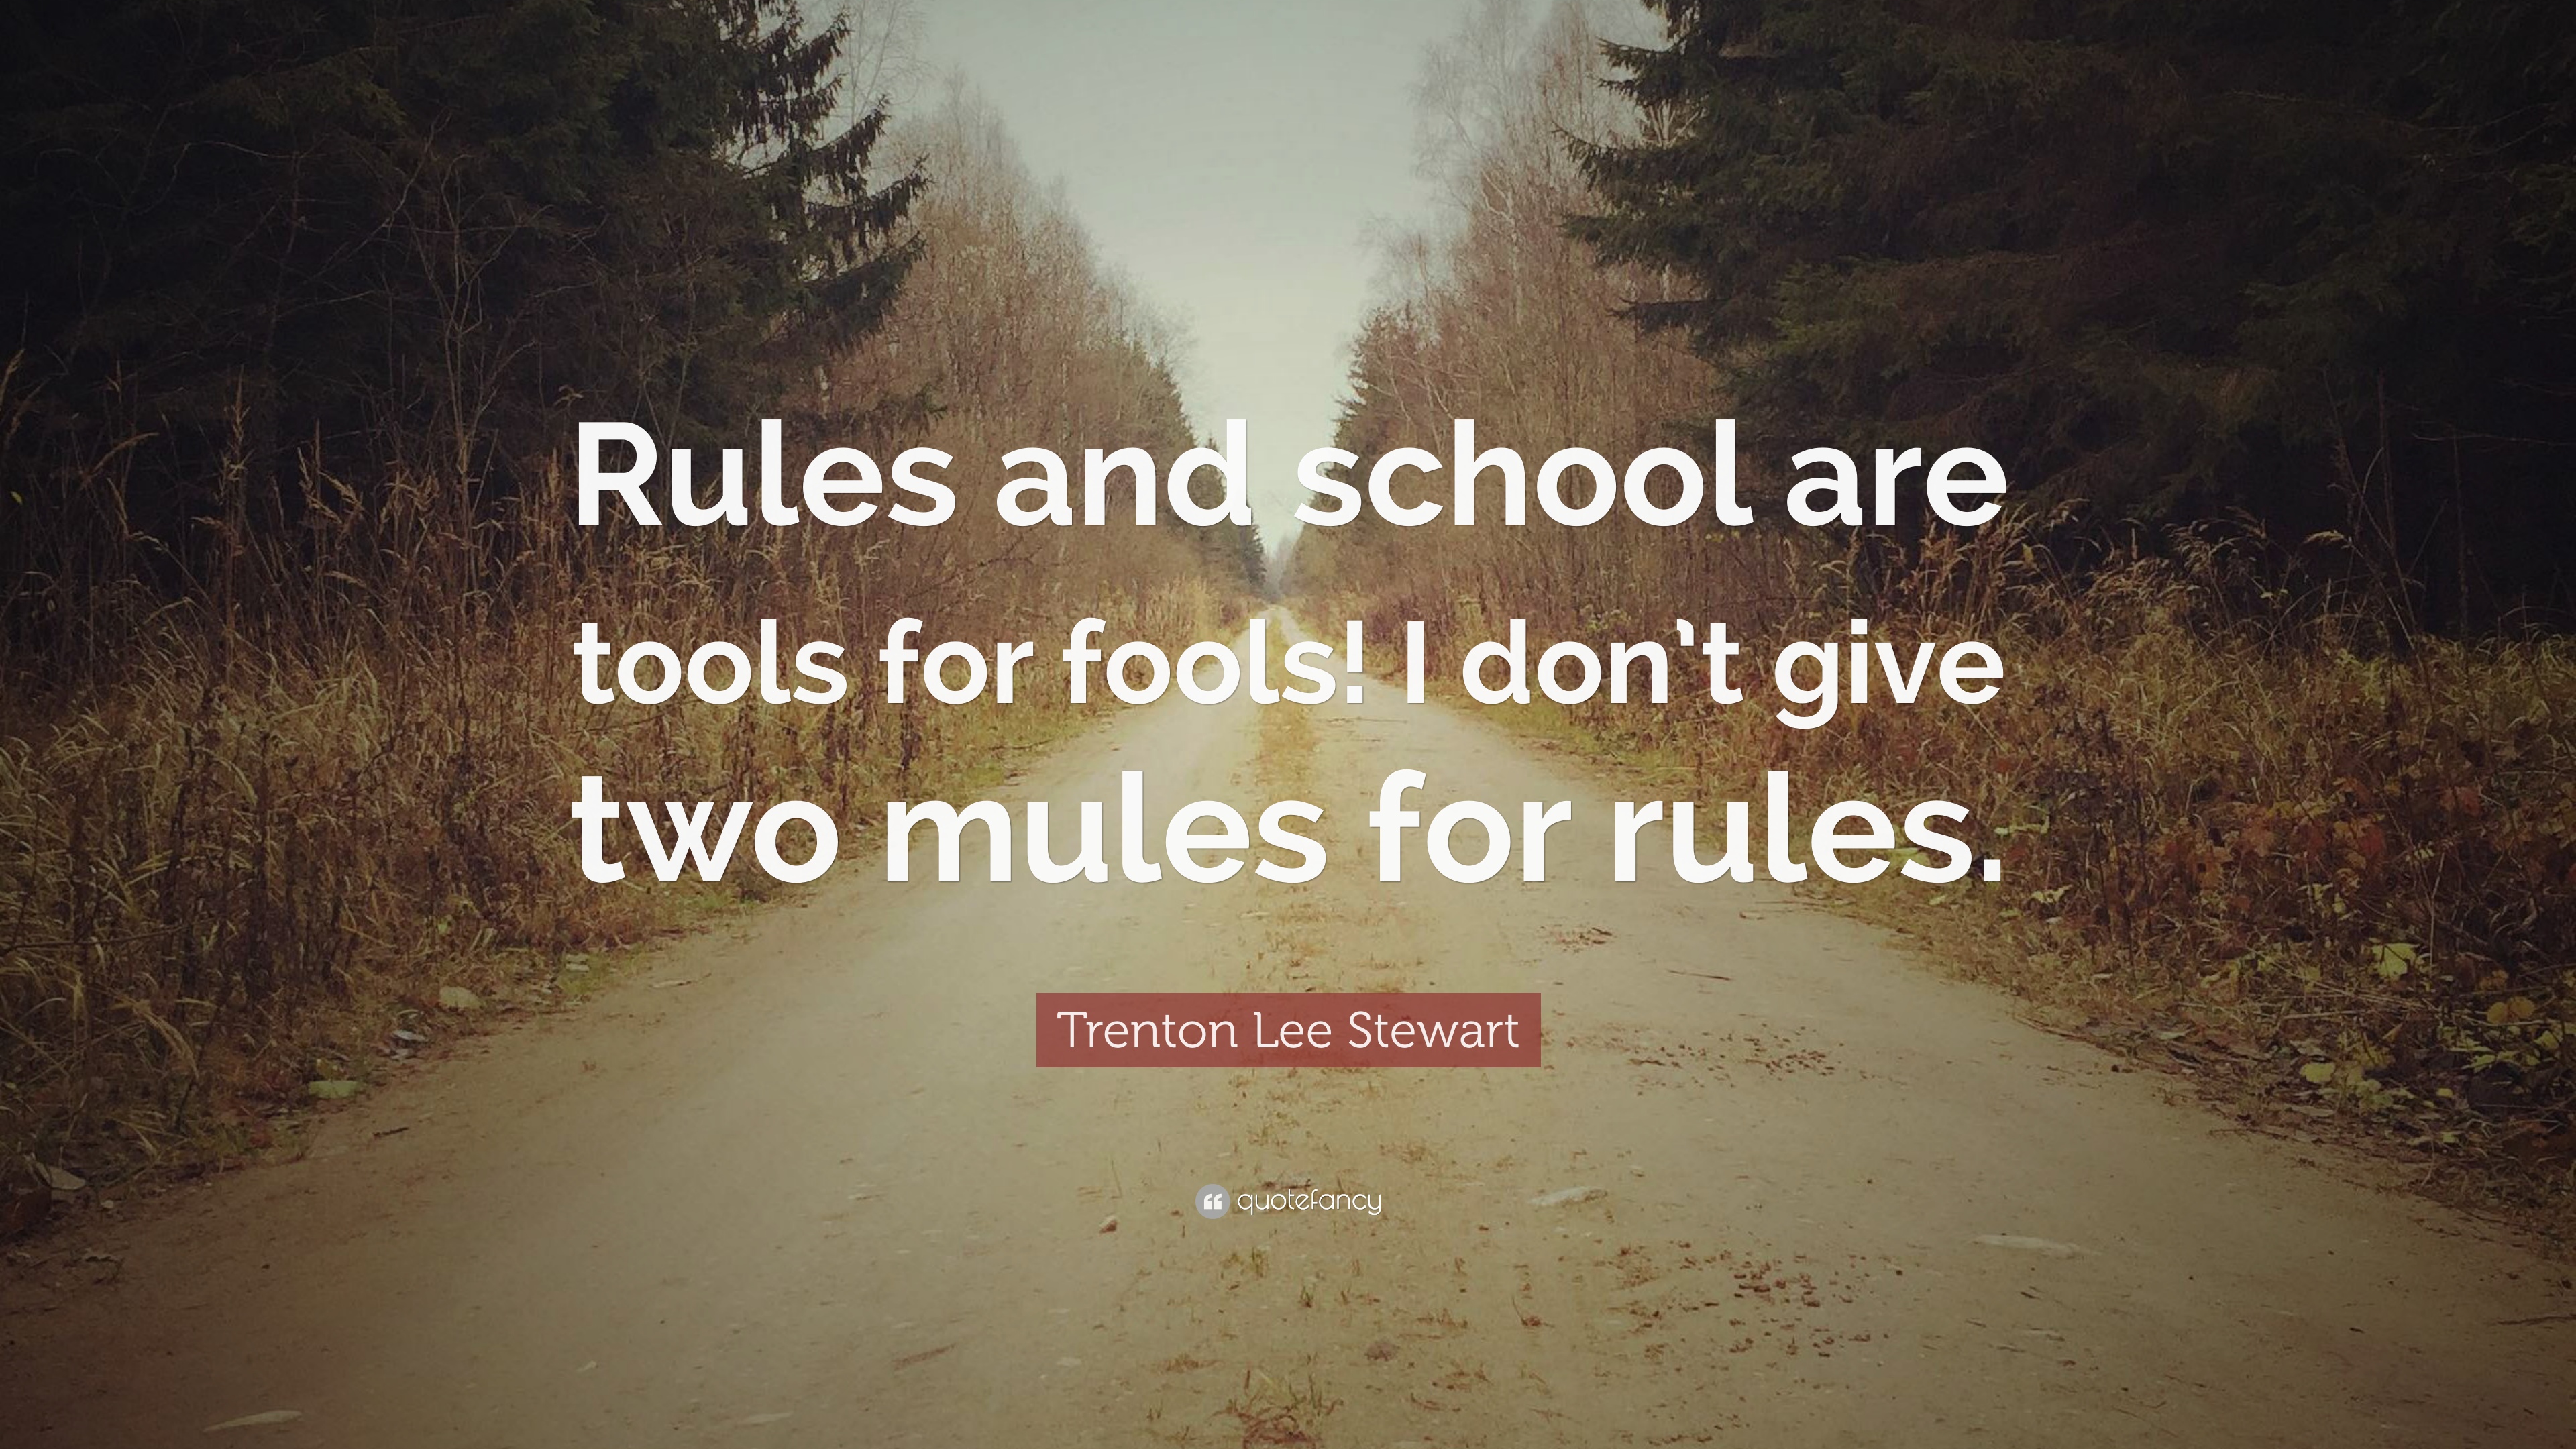 Trenton Lee Stewart Quote: “Rules and school are tools for fools! I